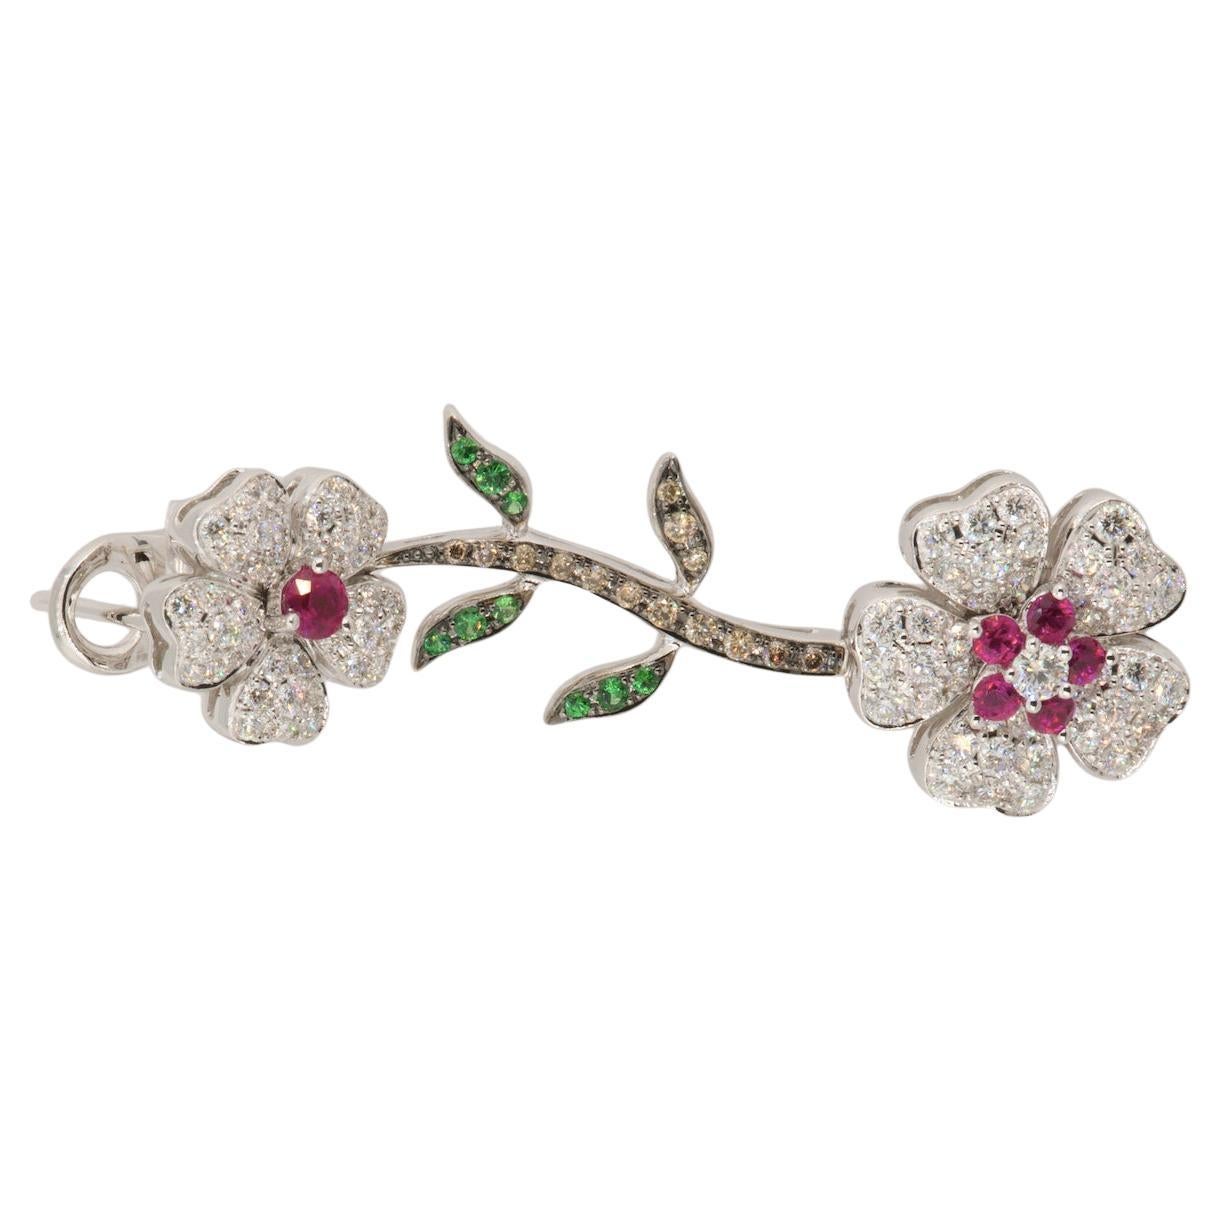 Olympus Art Certified,
18K 750 White Gold,
2.13 ct. Diamond Round,
0.23 ct. Diamond Round Brown,
0.18 ct. Tsavorite,
0.89 ct. Ruby

 Clematis

Cup-shaped, white and mauve flowers appear on the Clematis 'Huldine' after the height of summer and last